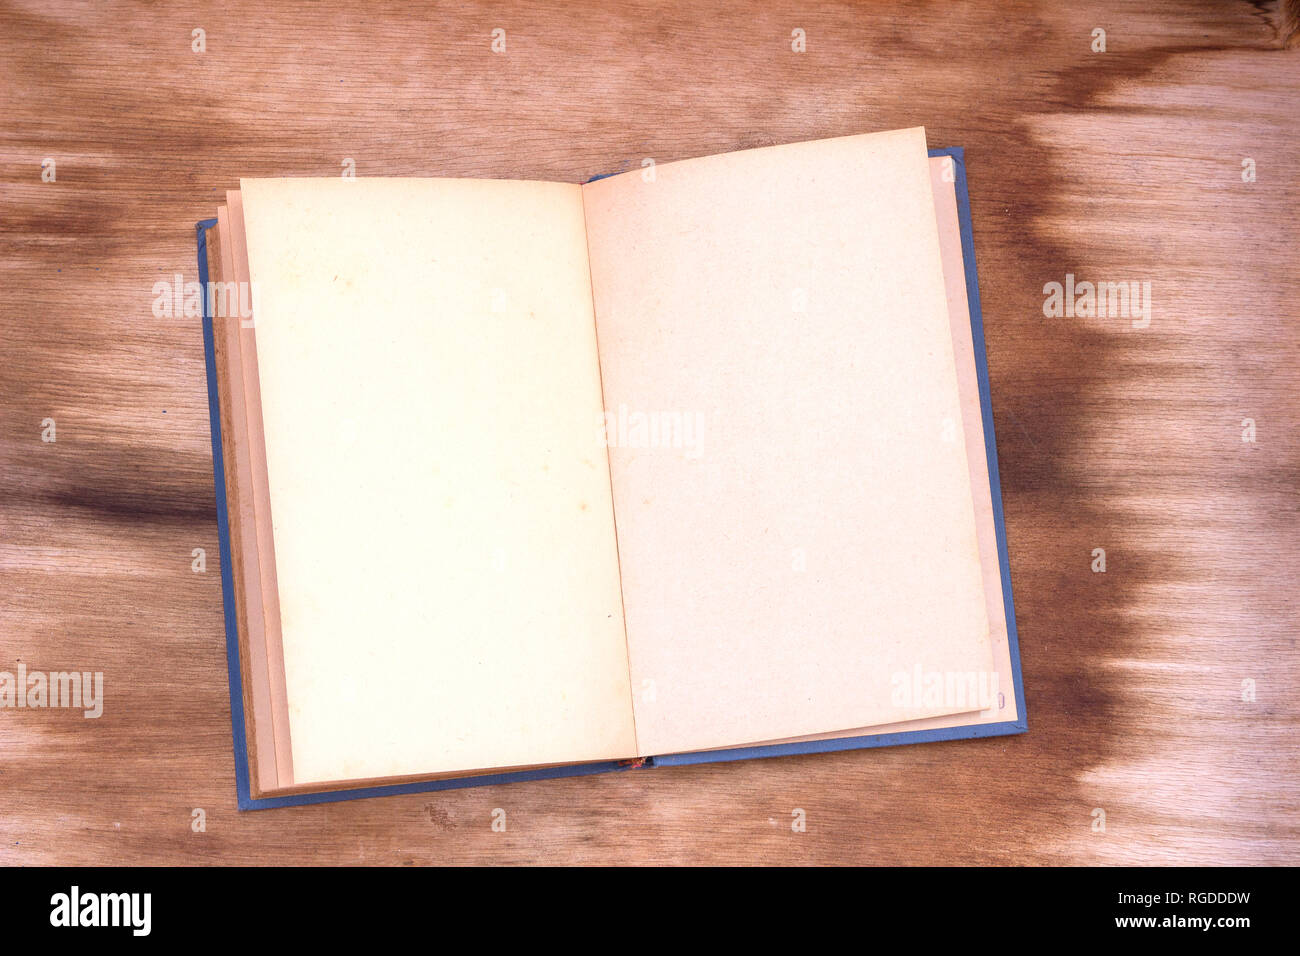 Old book blank pages stock photo. Image of abstract, antique - 2862258